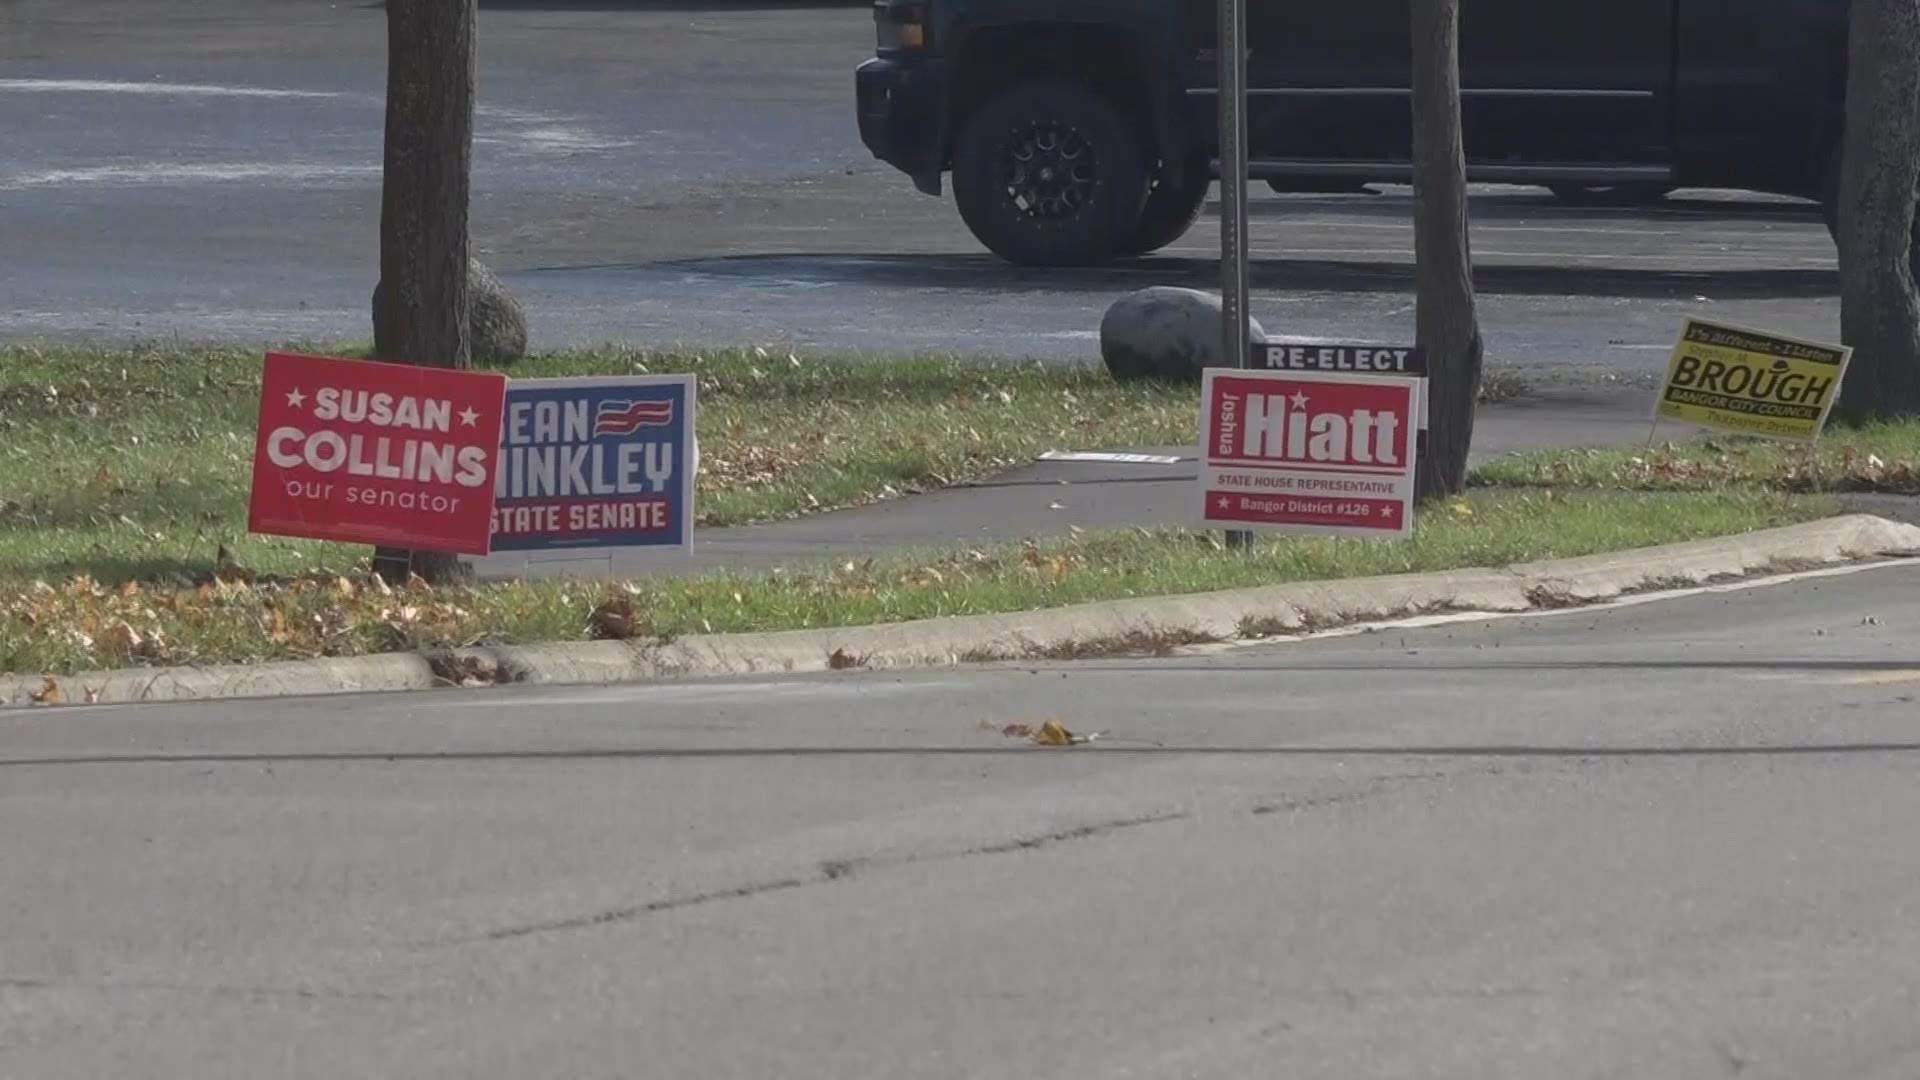 Don't toss out those campaign signs.